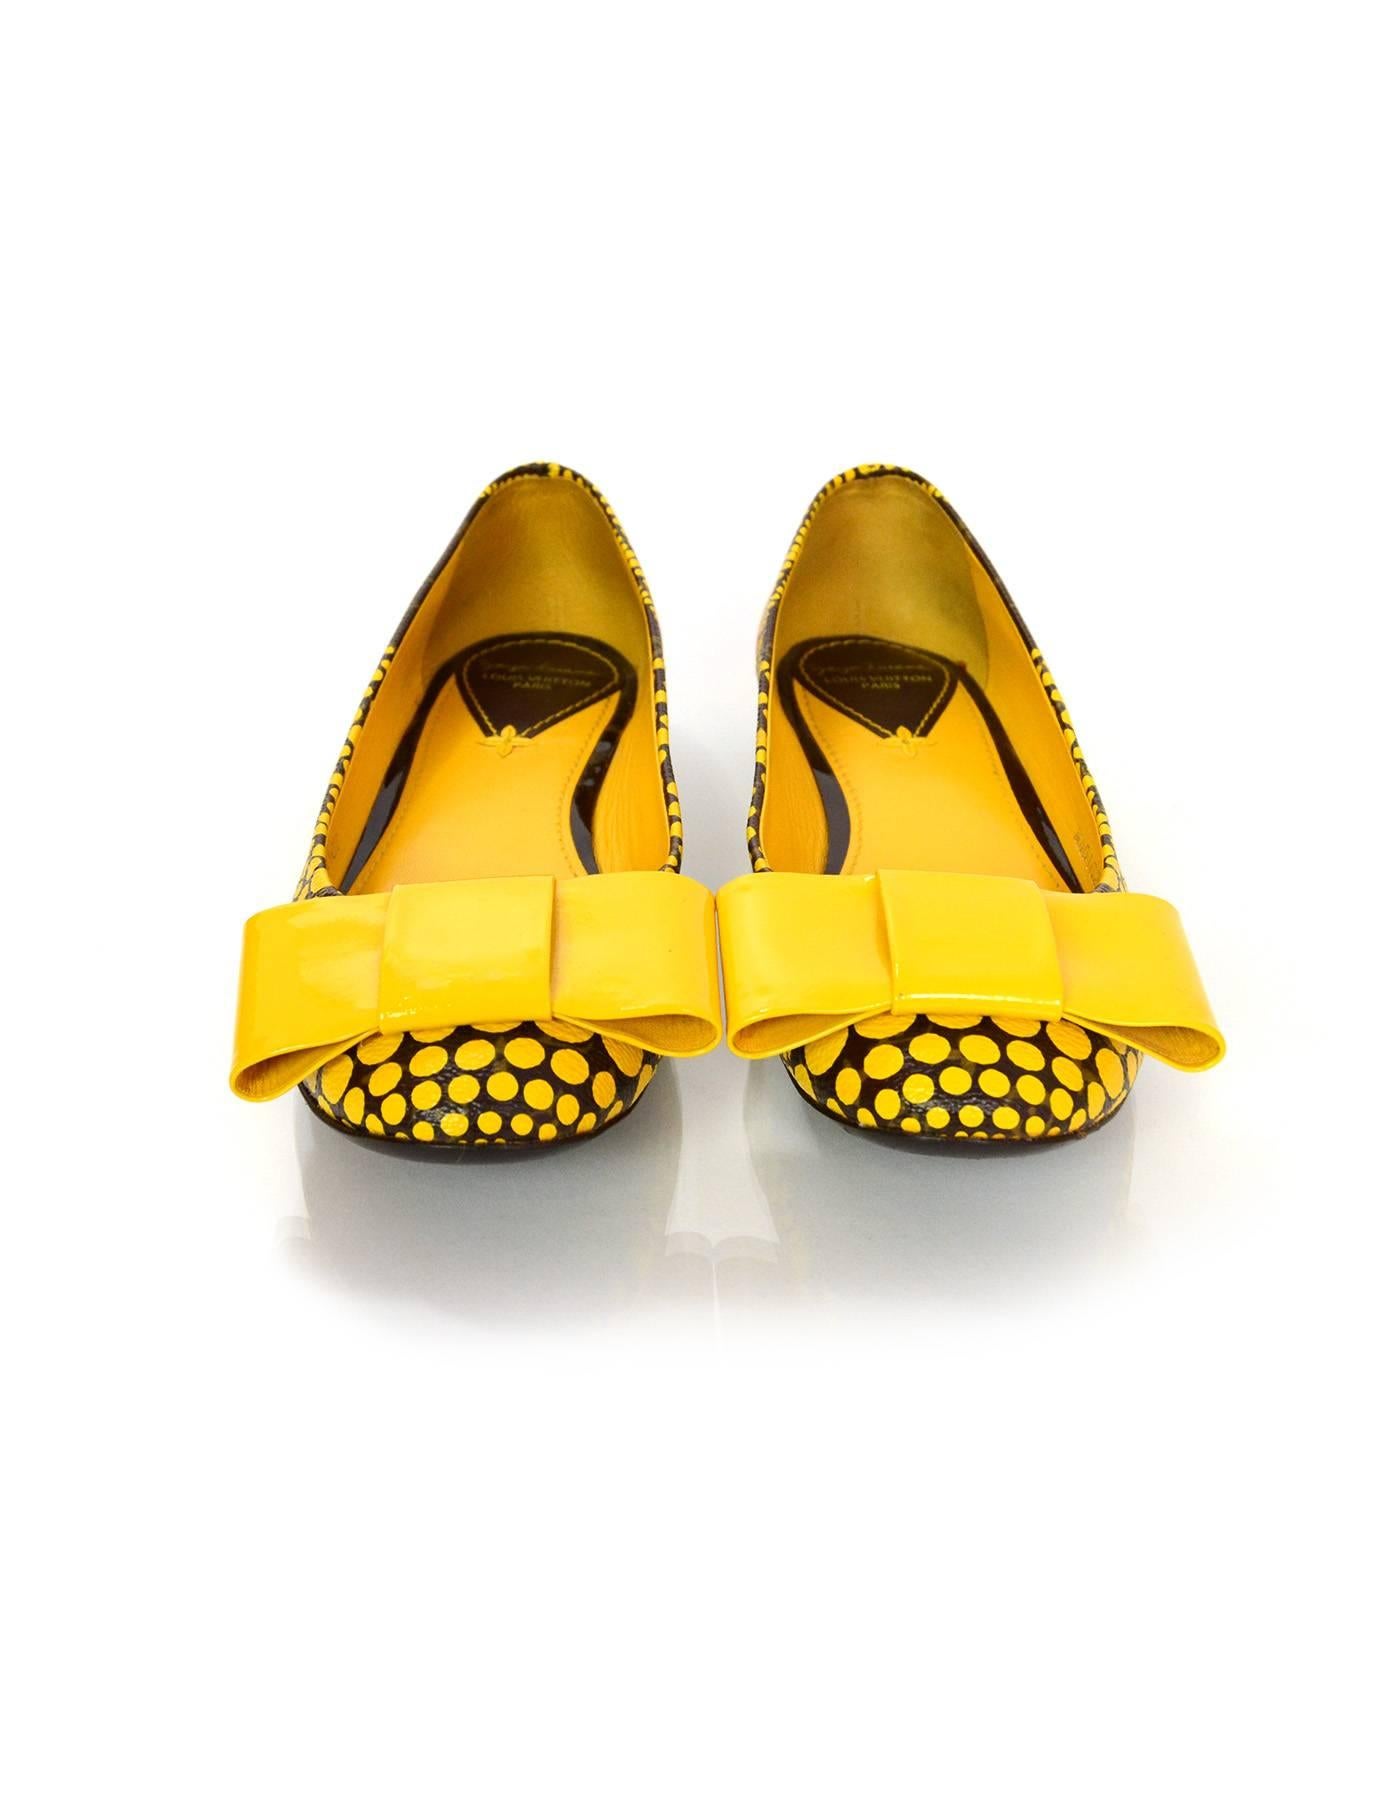 Louis Vuitton Monogram Collectors Yayoi Kusama Yellow Dots Flats Sz 36 In Excellent Condition In New York, NY